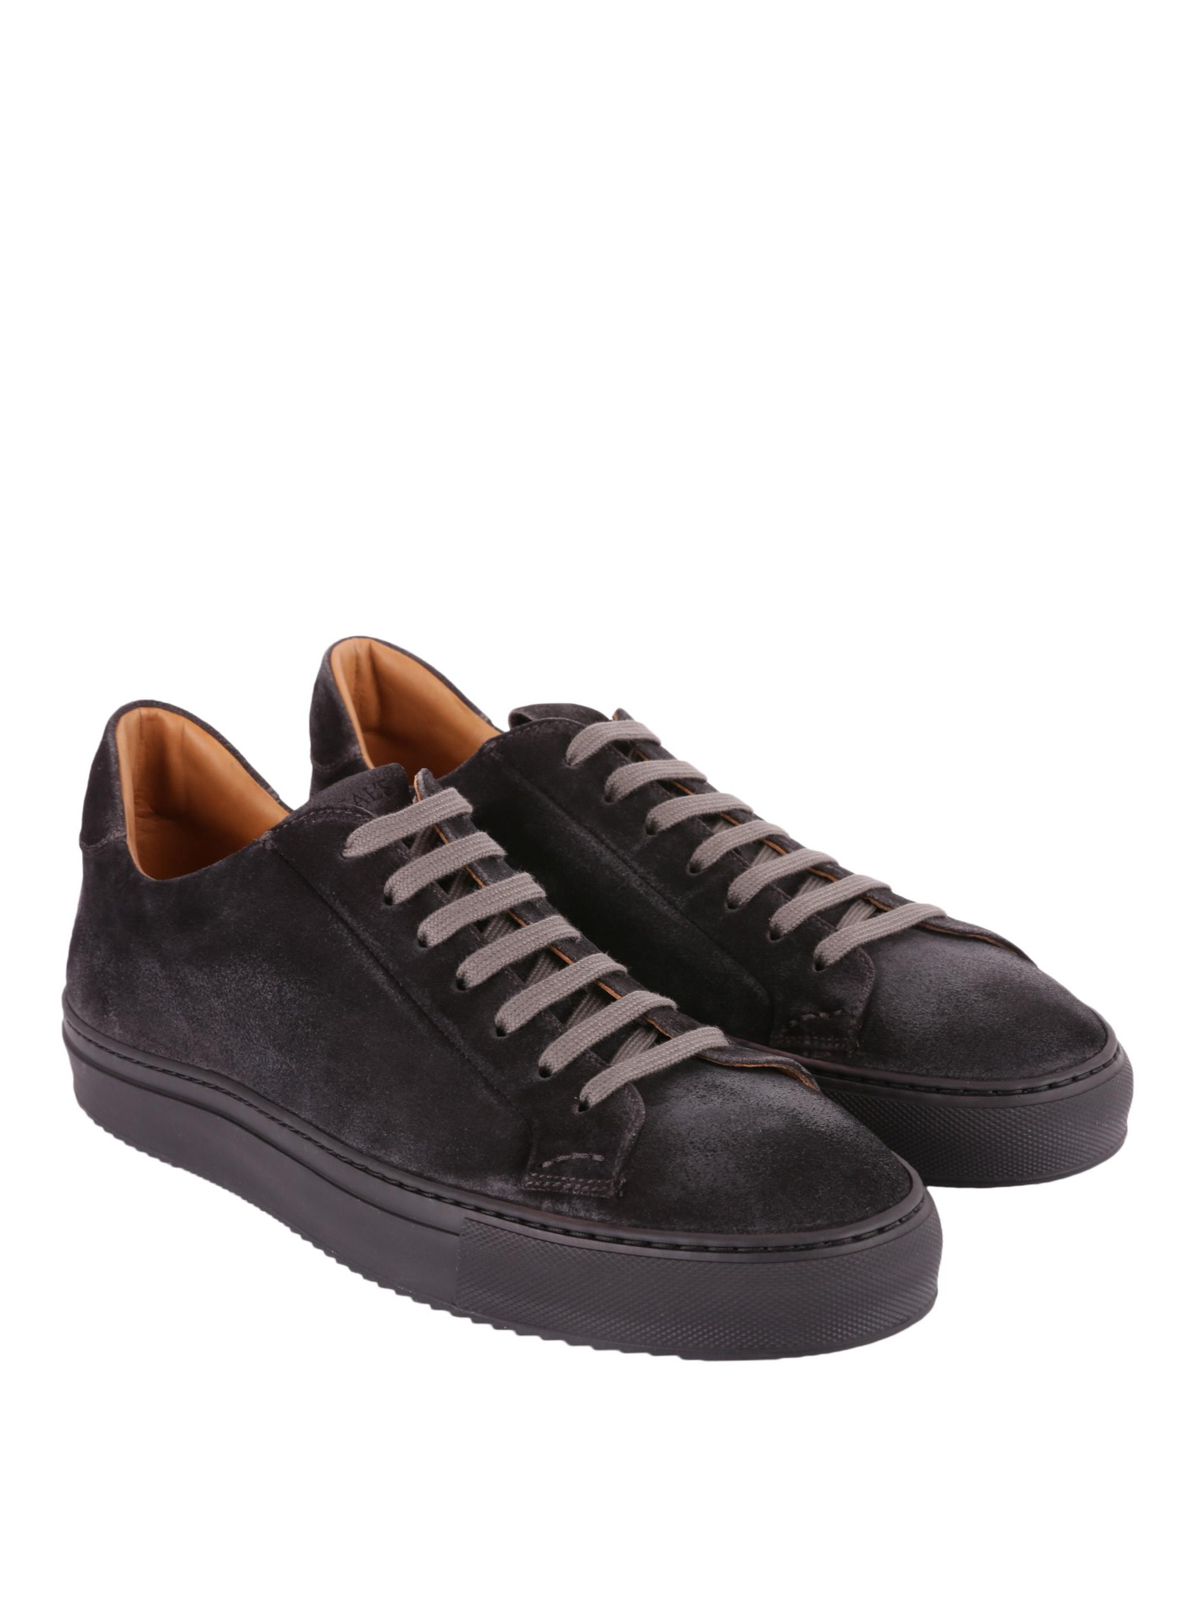 Doucal's - Smooth anthracite suede sneakers - trainers - 1796KOBEUF089NN05